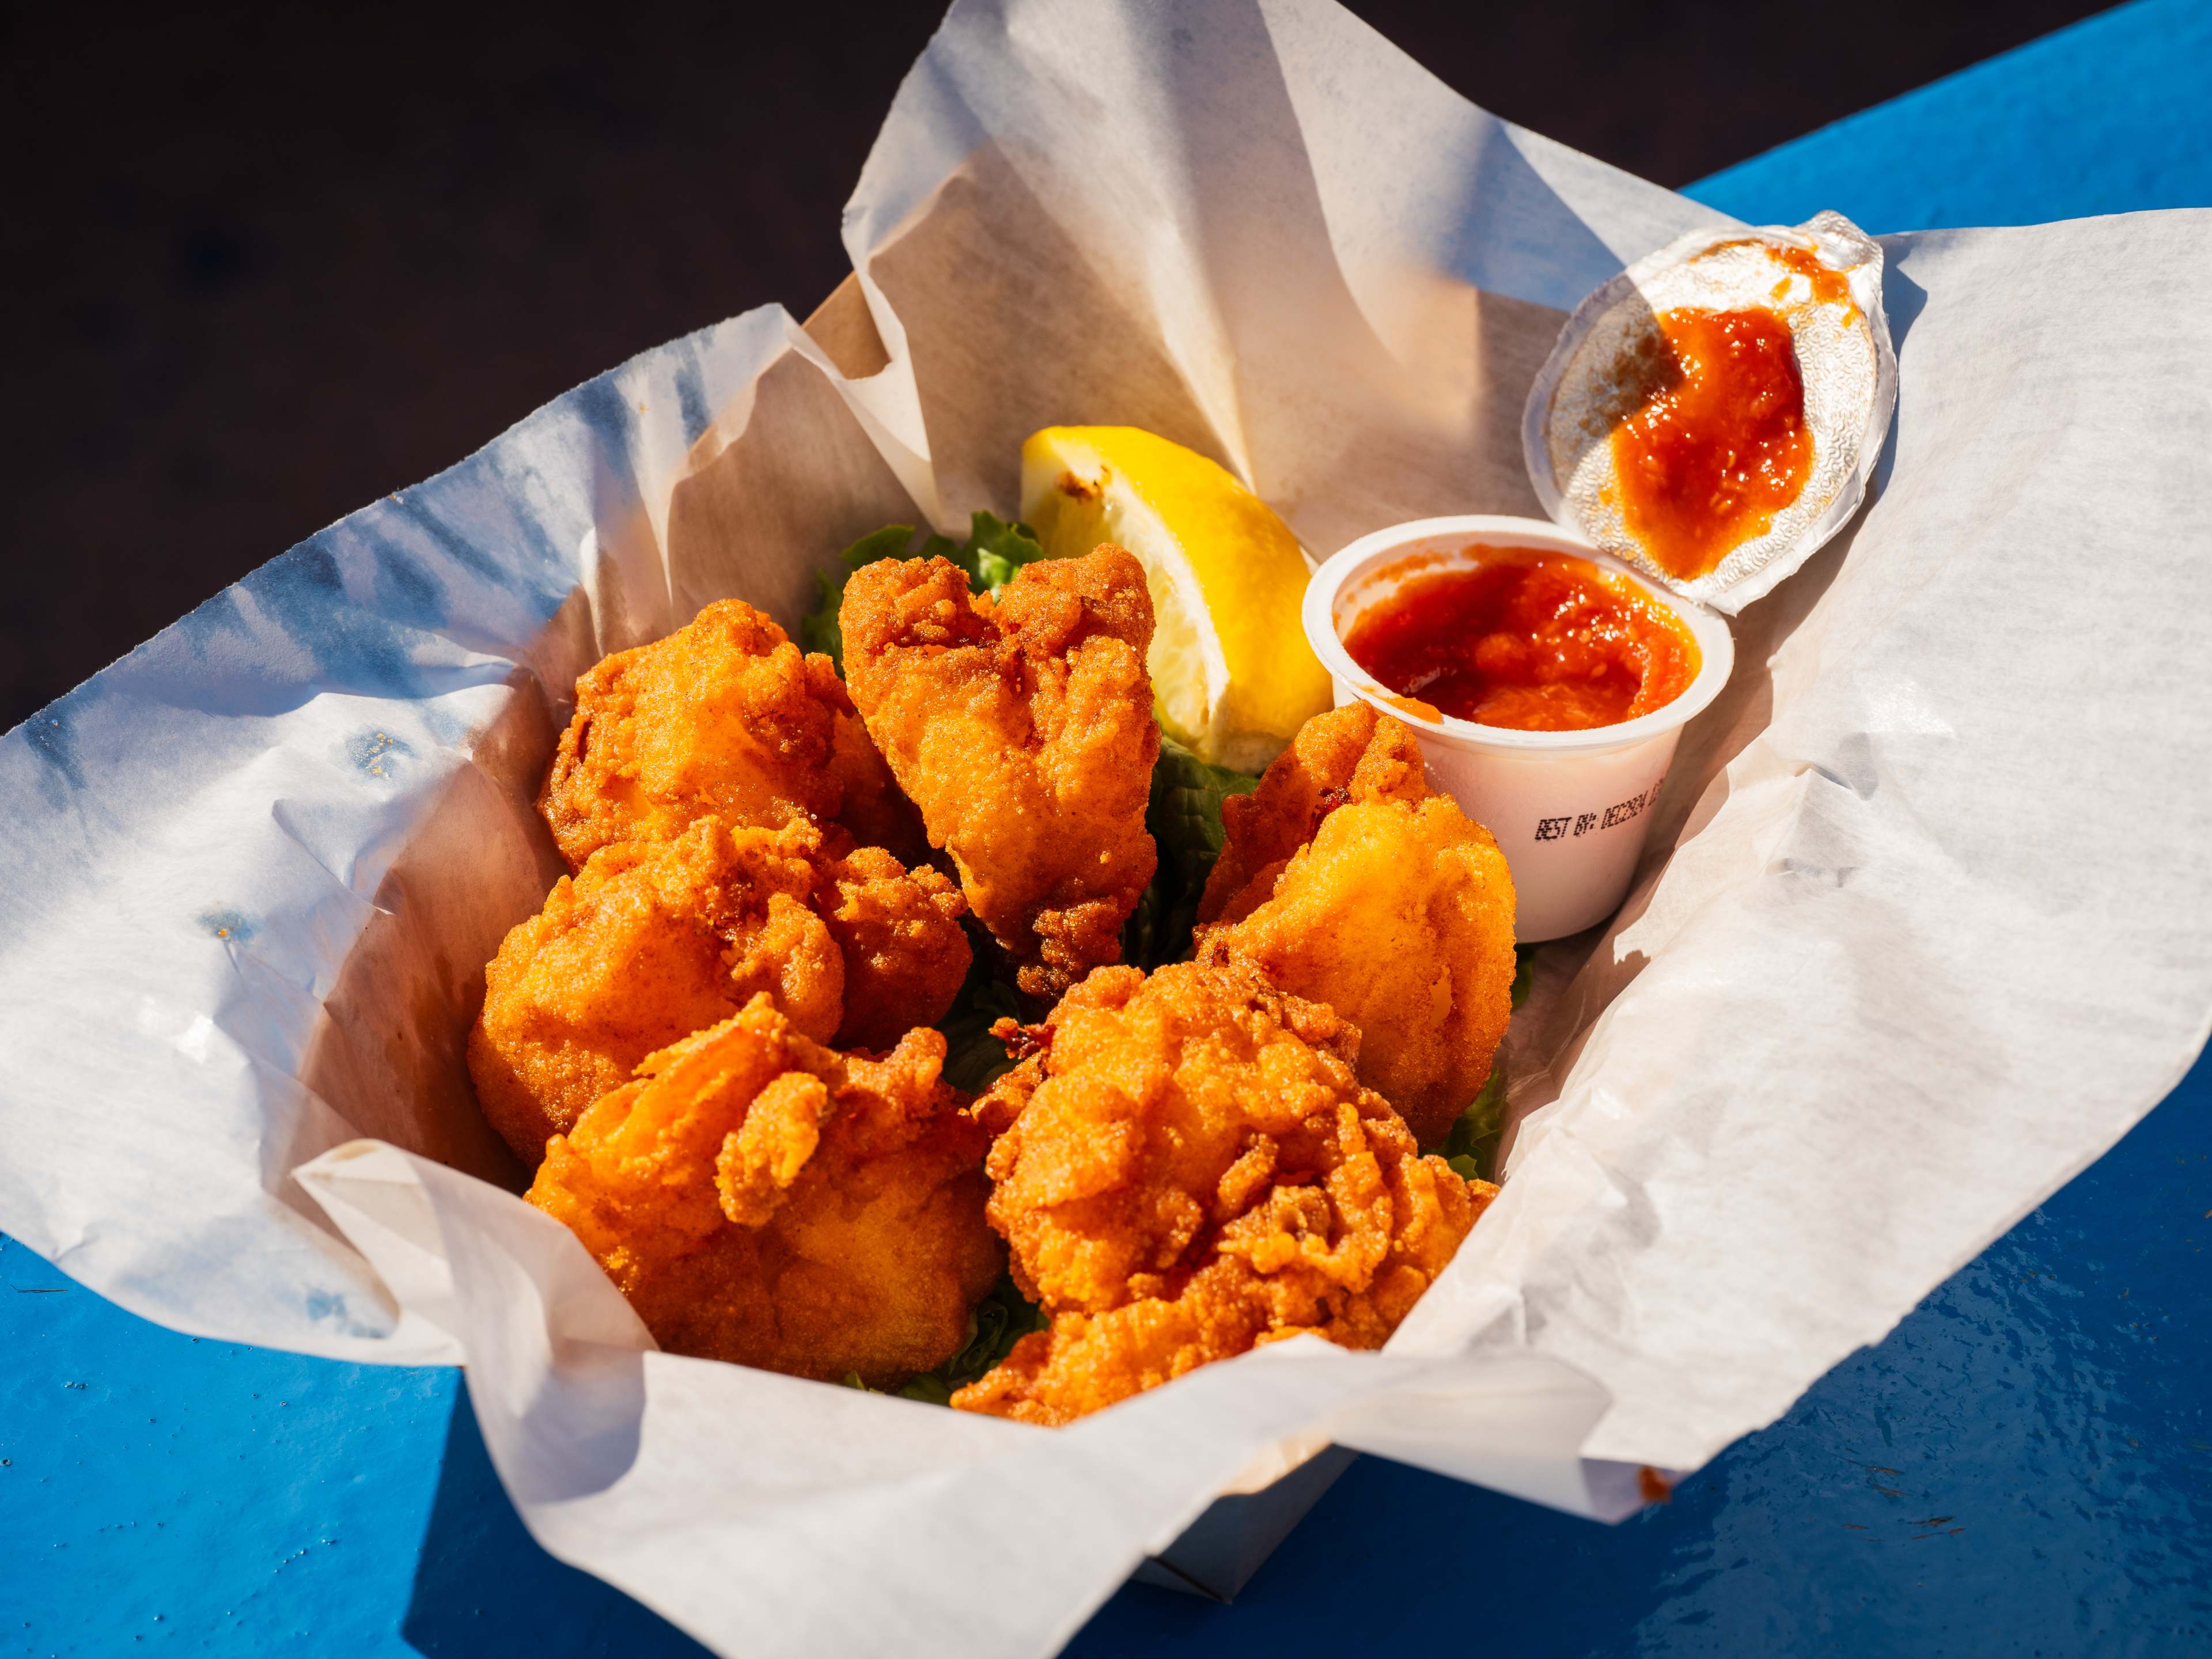 A plate of fried seafood on a blue picnic table